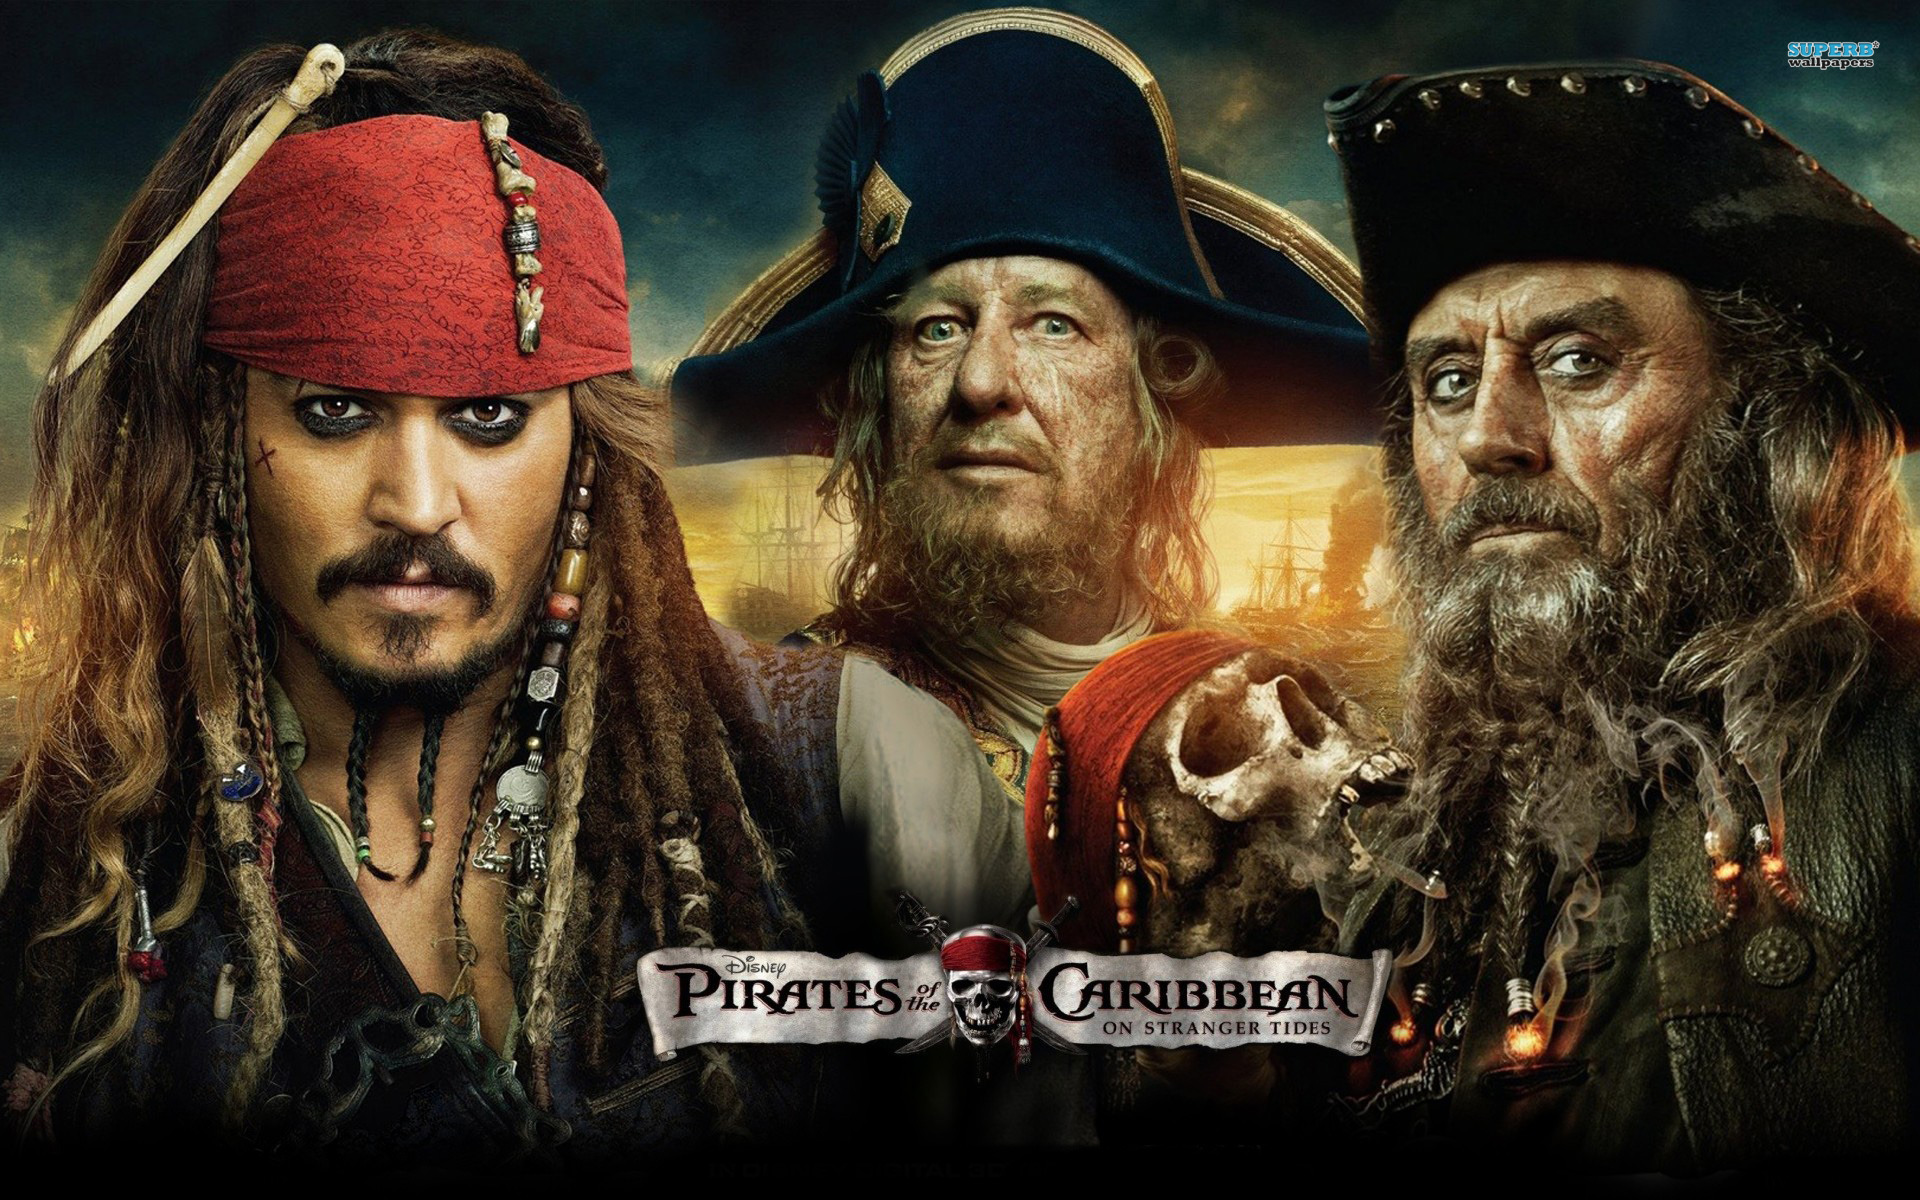 Pirates Of The Caribbean #2